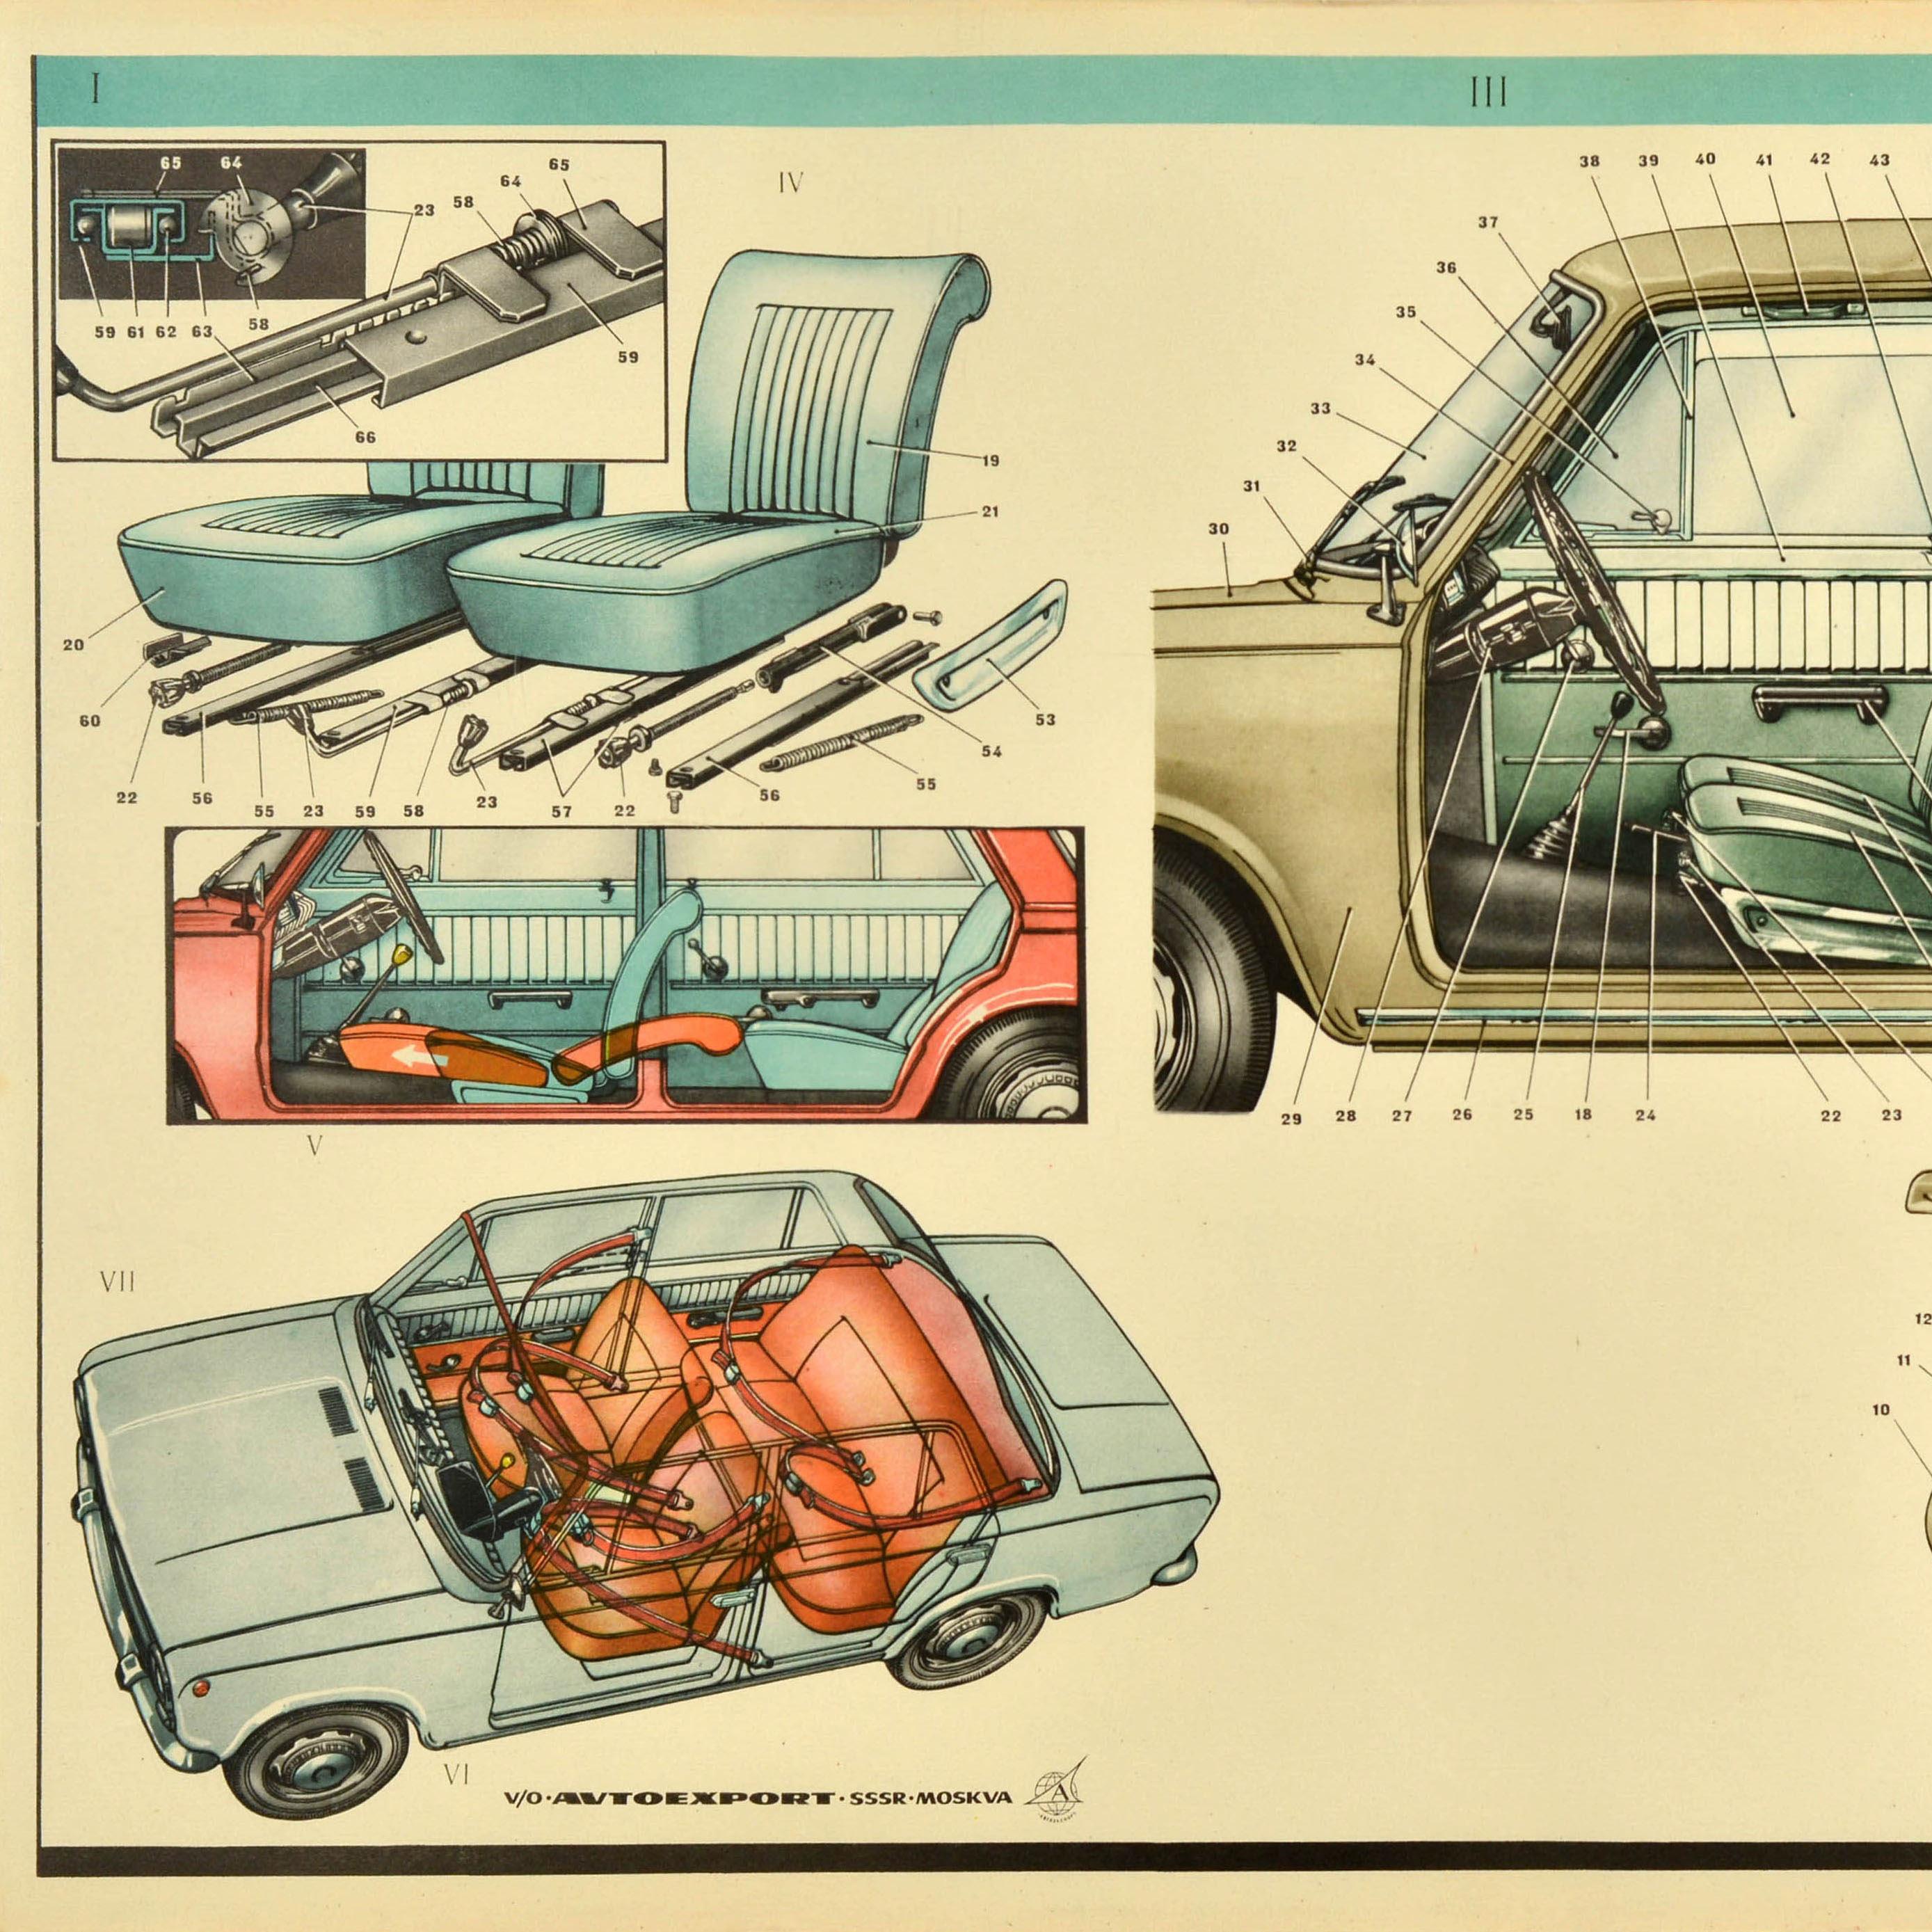 Original vintage car advertising poster for Lada showing the interior of the vehicle with smaller images of the boot and seating detailing the mechanisms and seat belts, the text below - v/o Avtoexport SSSR Moskva / Autoexport USSR Moscow.